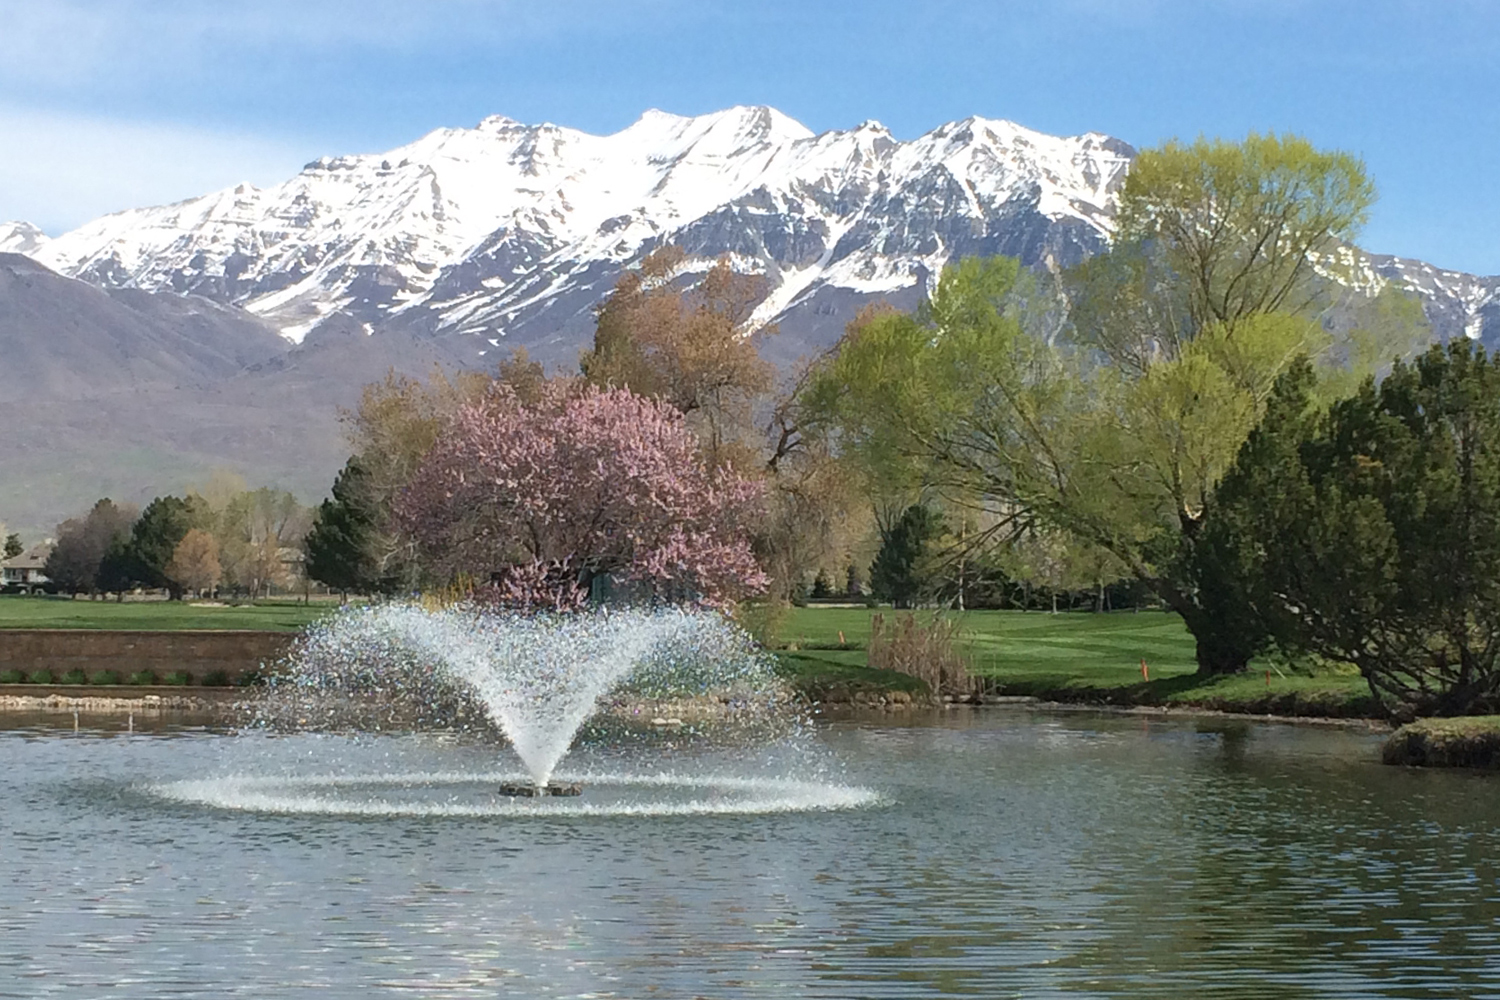 One of Otterbine's Sunburst Aerating Fountains in a beautiful park